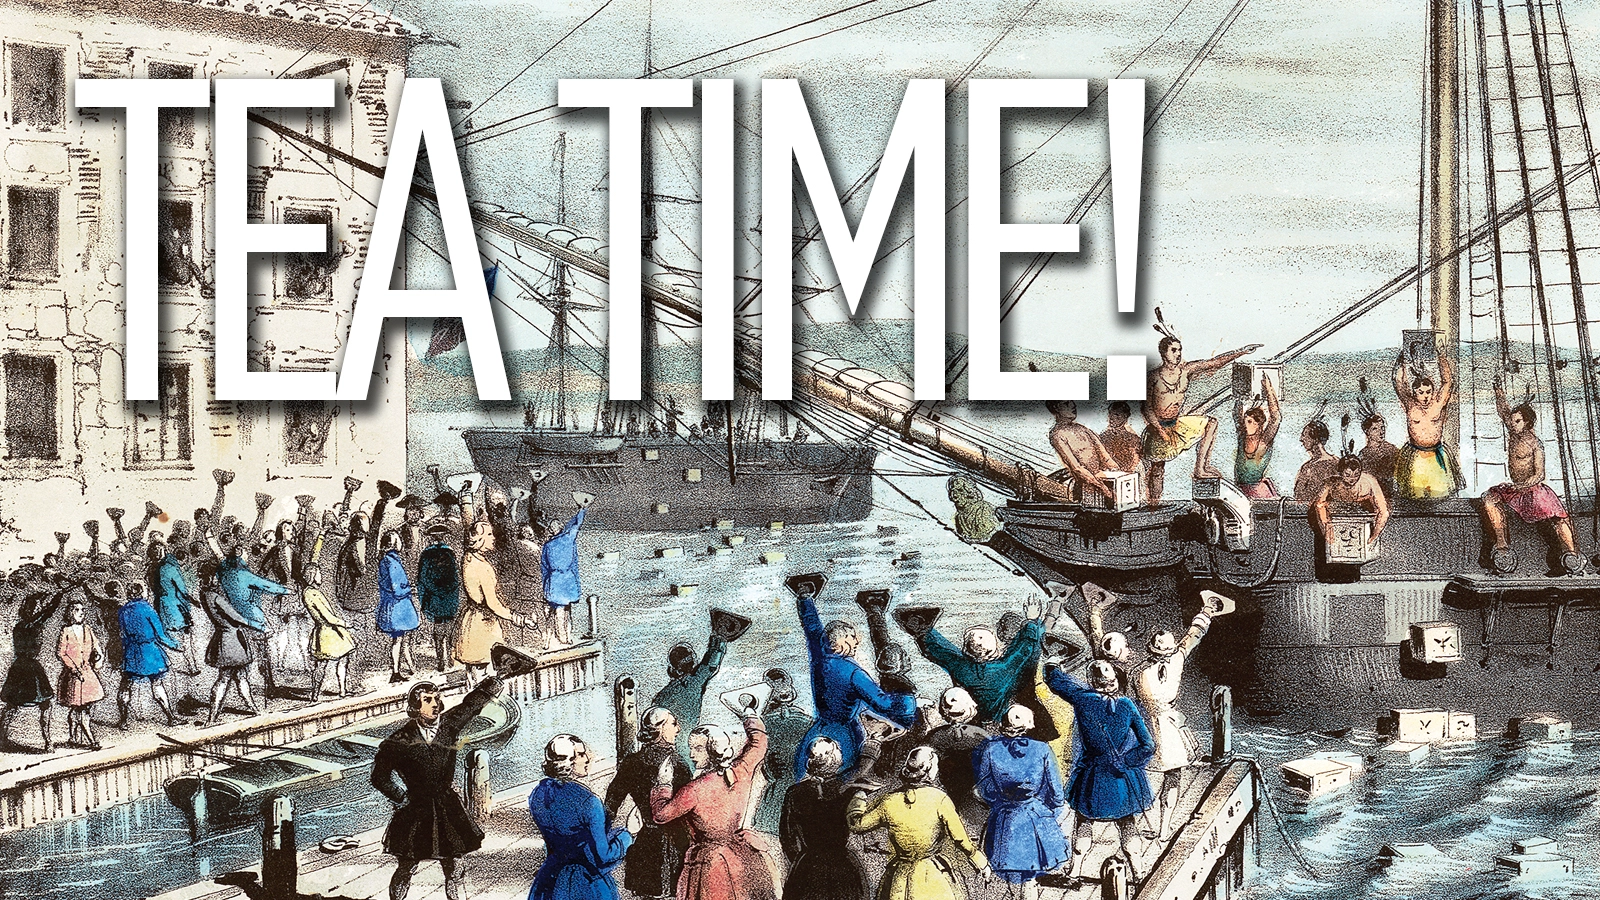 Preserved art of the 'Boston Tea Party' and caption.